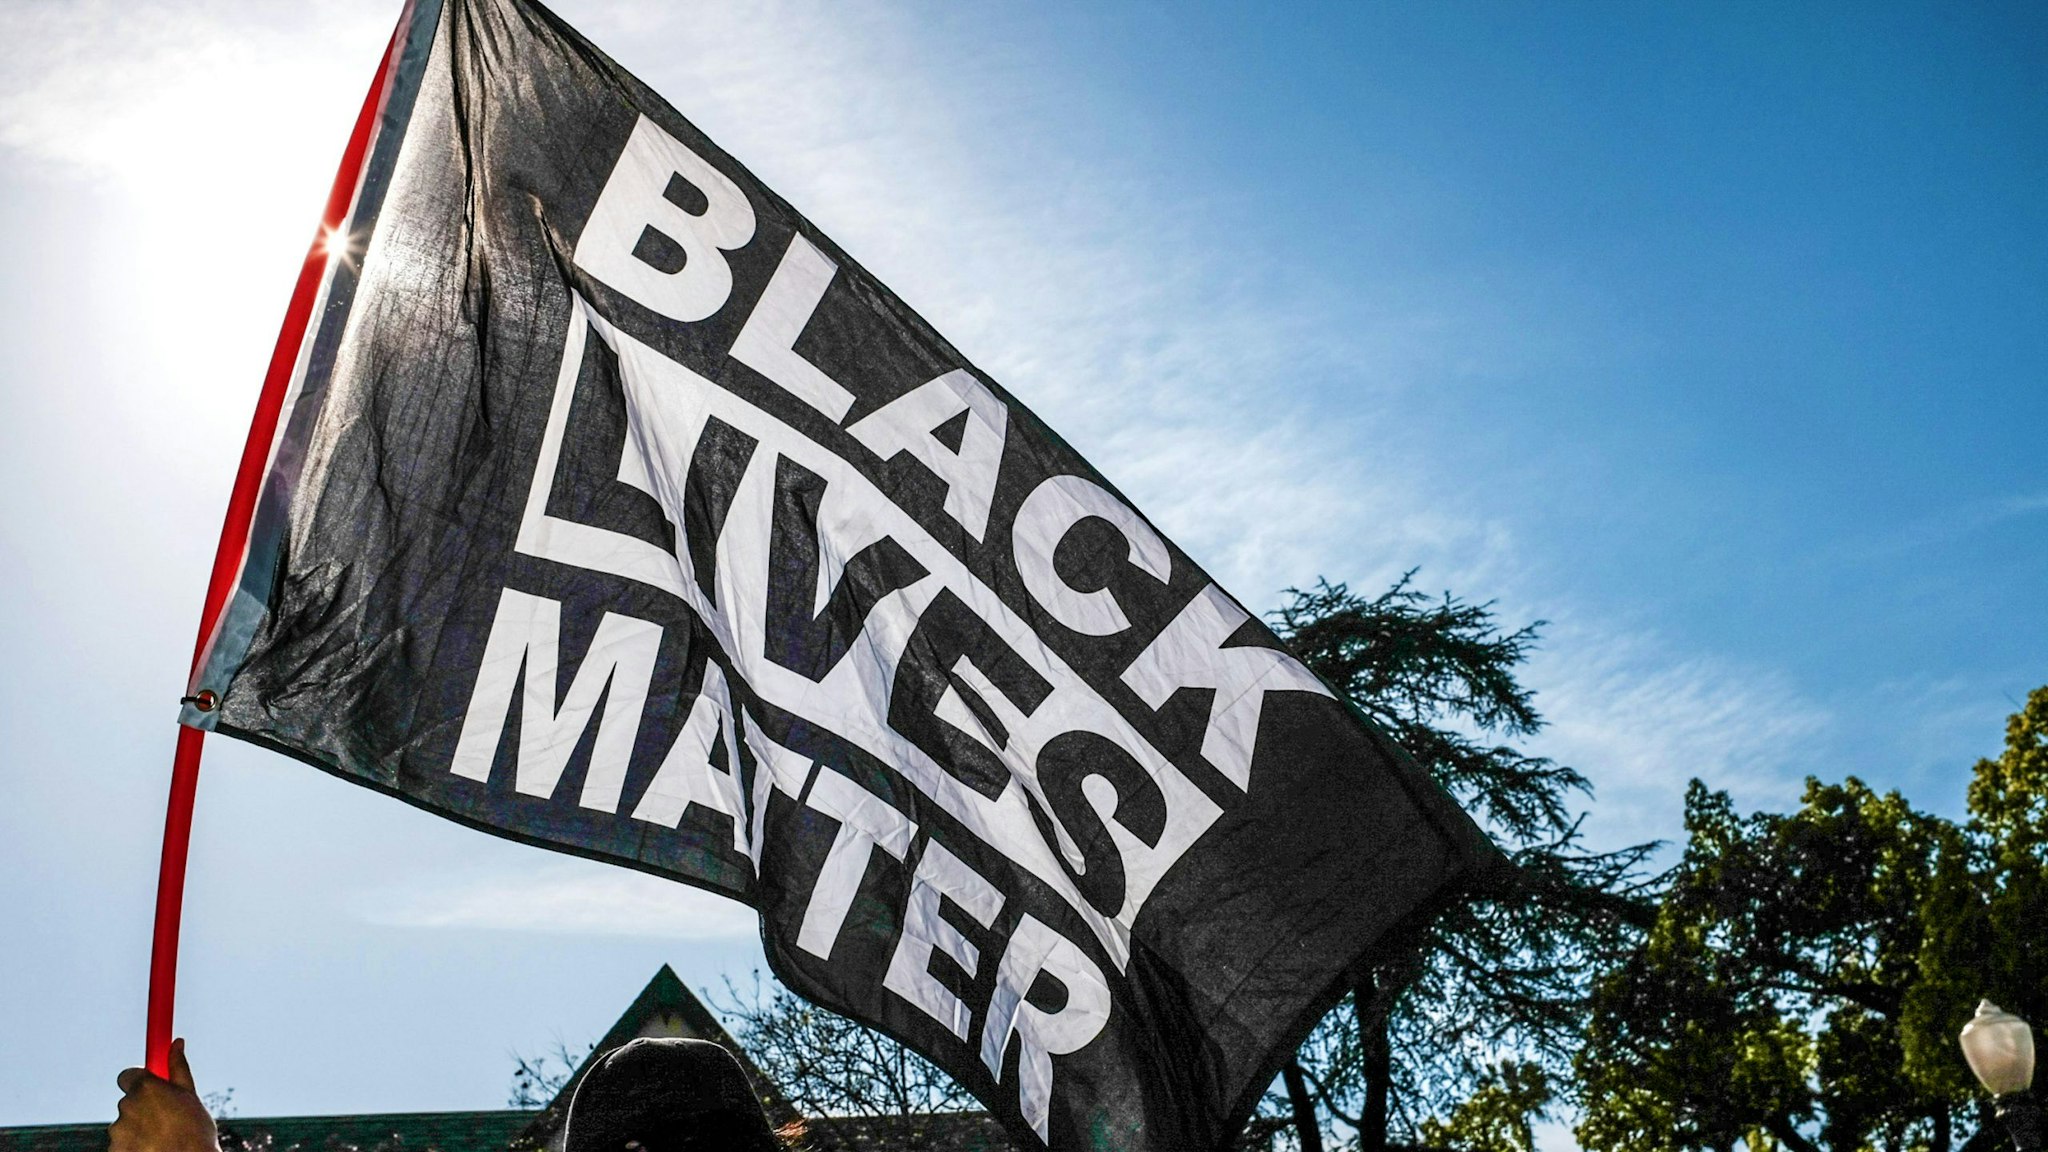 LOS ANGELES, CALIFORNIA, UNITED STATES - 2021/04/20: A protester waves a Black Lives Matter flag during the demonstration. Hours after the verdict of the Derek Chauvin trial, protesters meet outside of Los Angeles Mayor Eric Garcetti's home to protest his proposed funding of the Los Angeles Police Department.